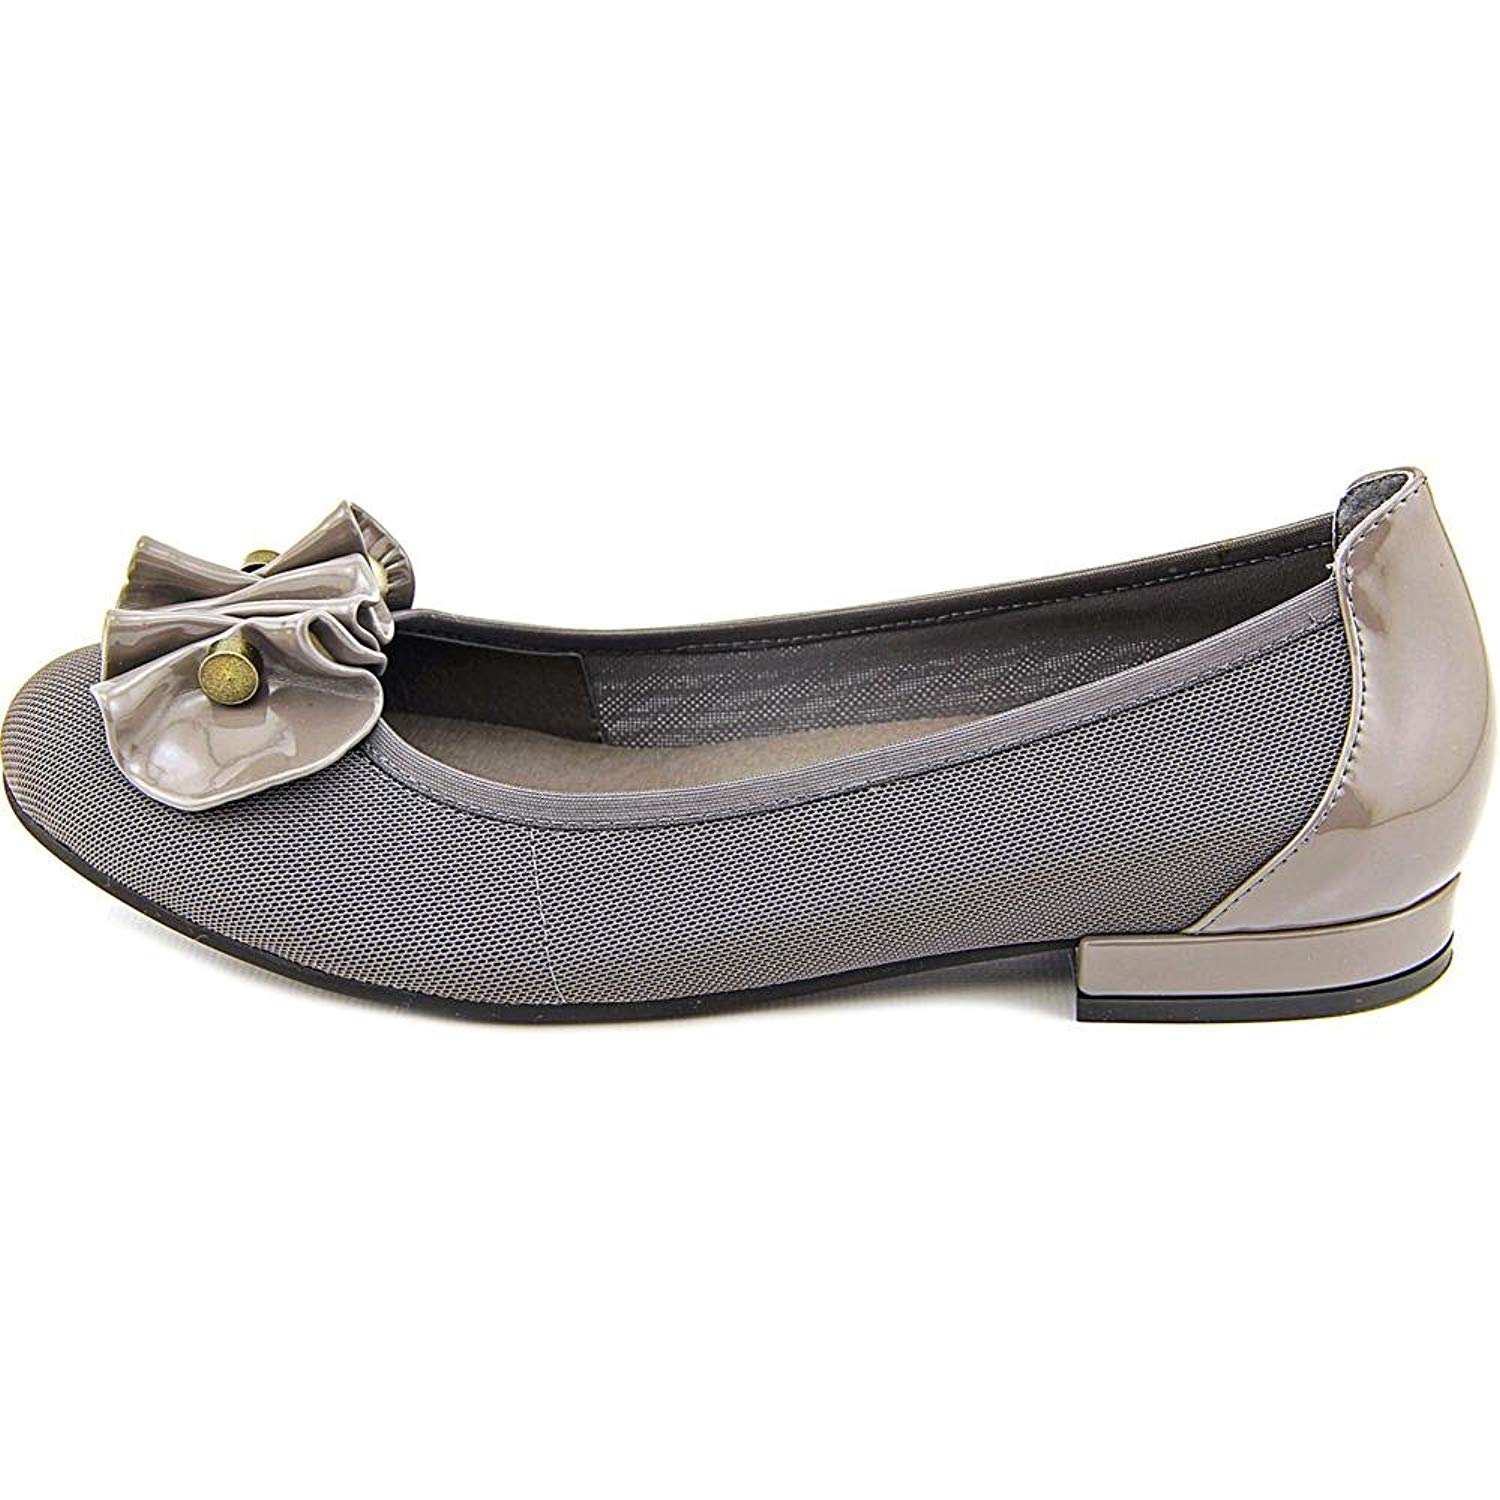 David Tate Womens Ballet Flats in Silver Color, Size 7 FVZ | eBay